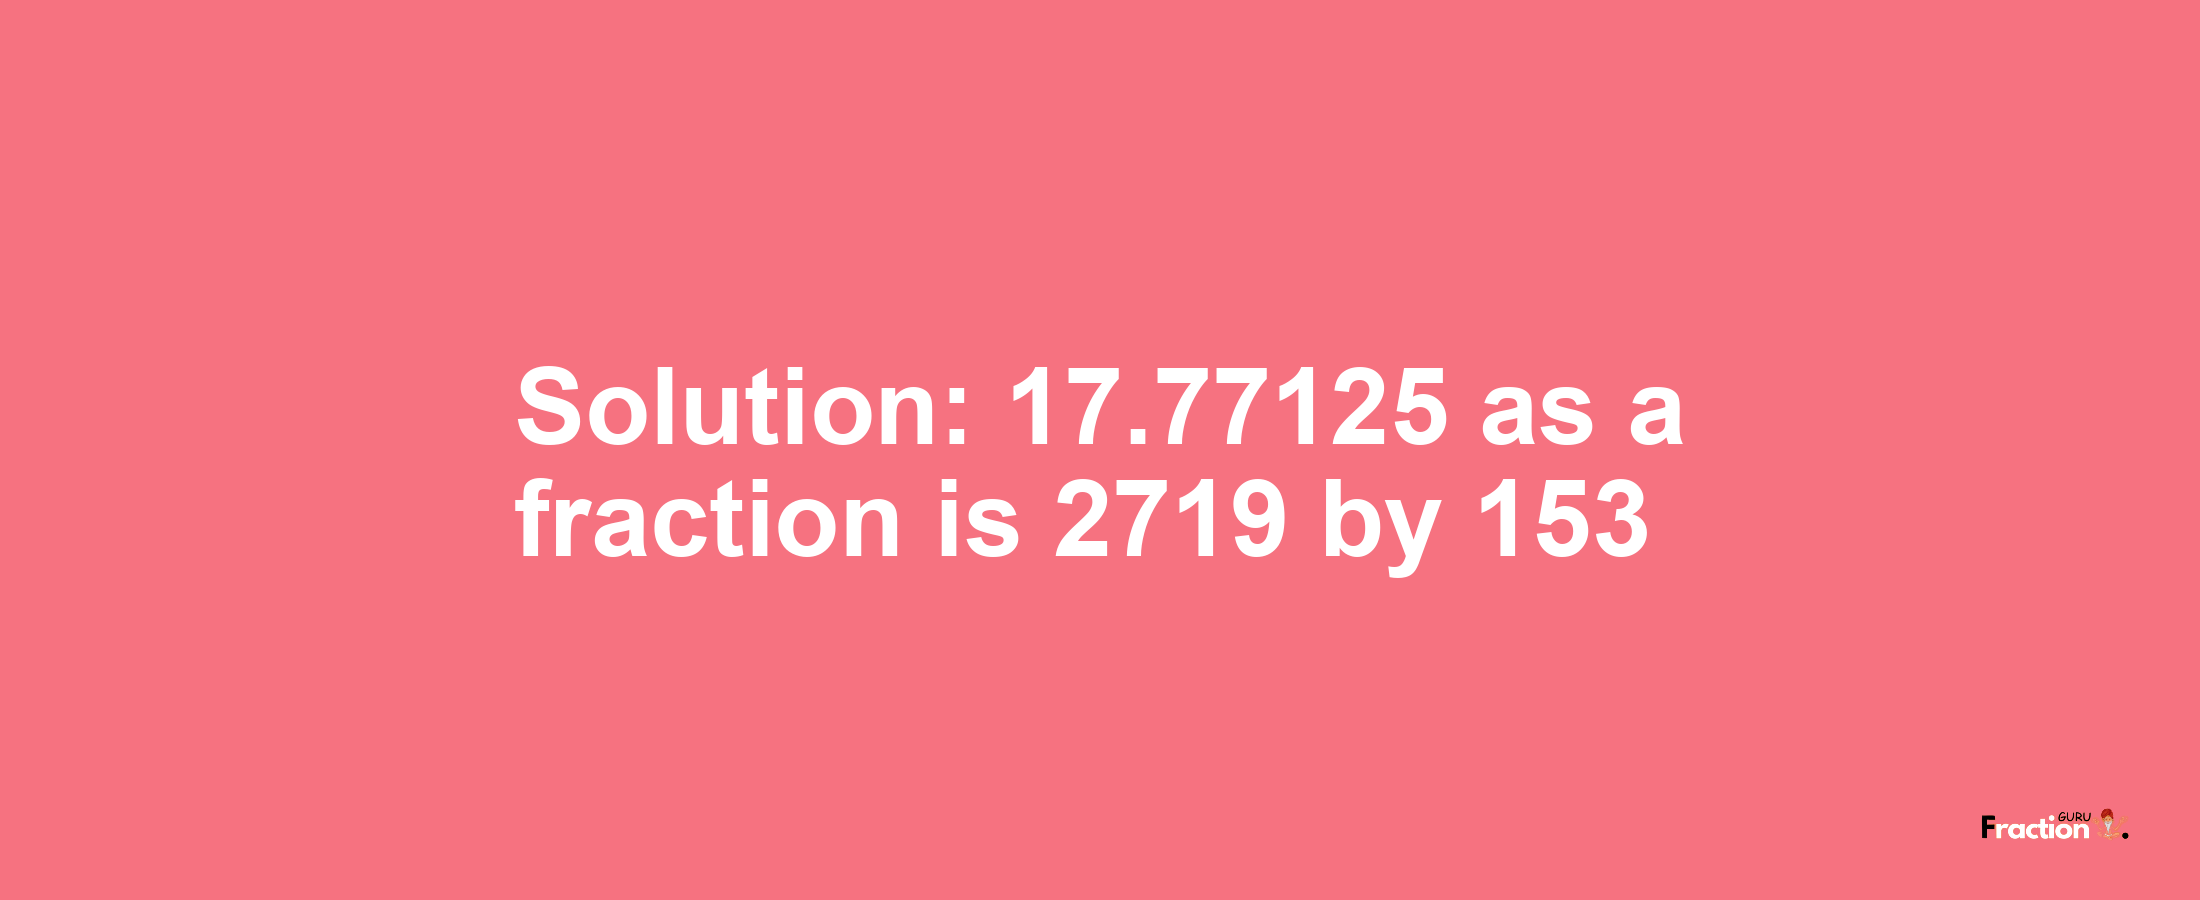 Solution:17.77125 as a fraction is 2719/153